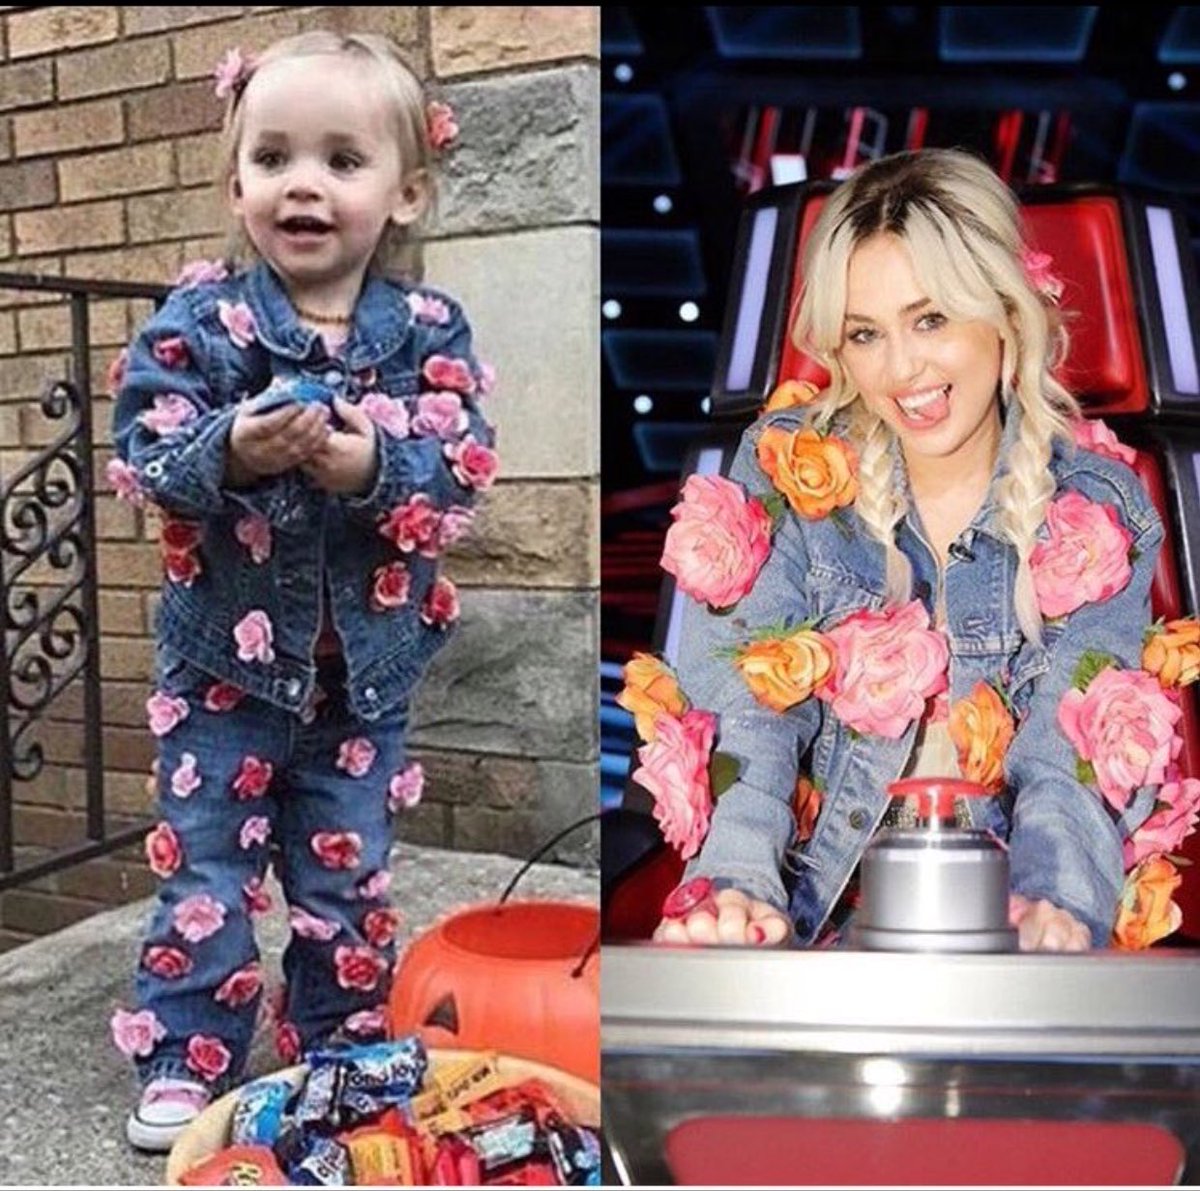 Mini Miley! Sooo cuuuute!!! I told y’all I was younger now! https://t.co/xXz3h5QTjm